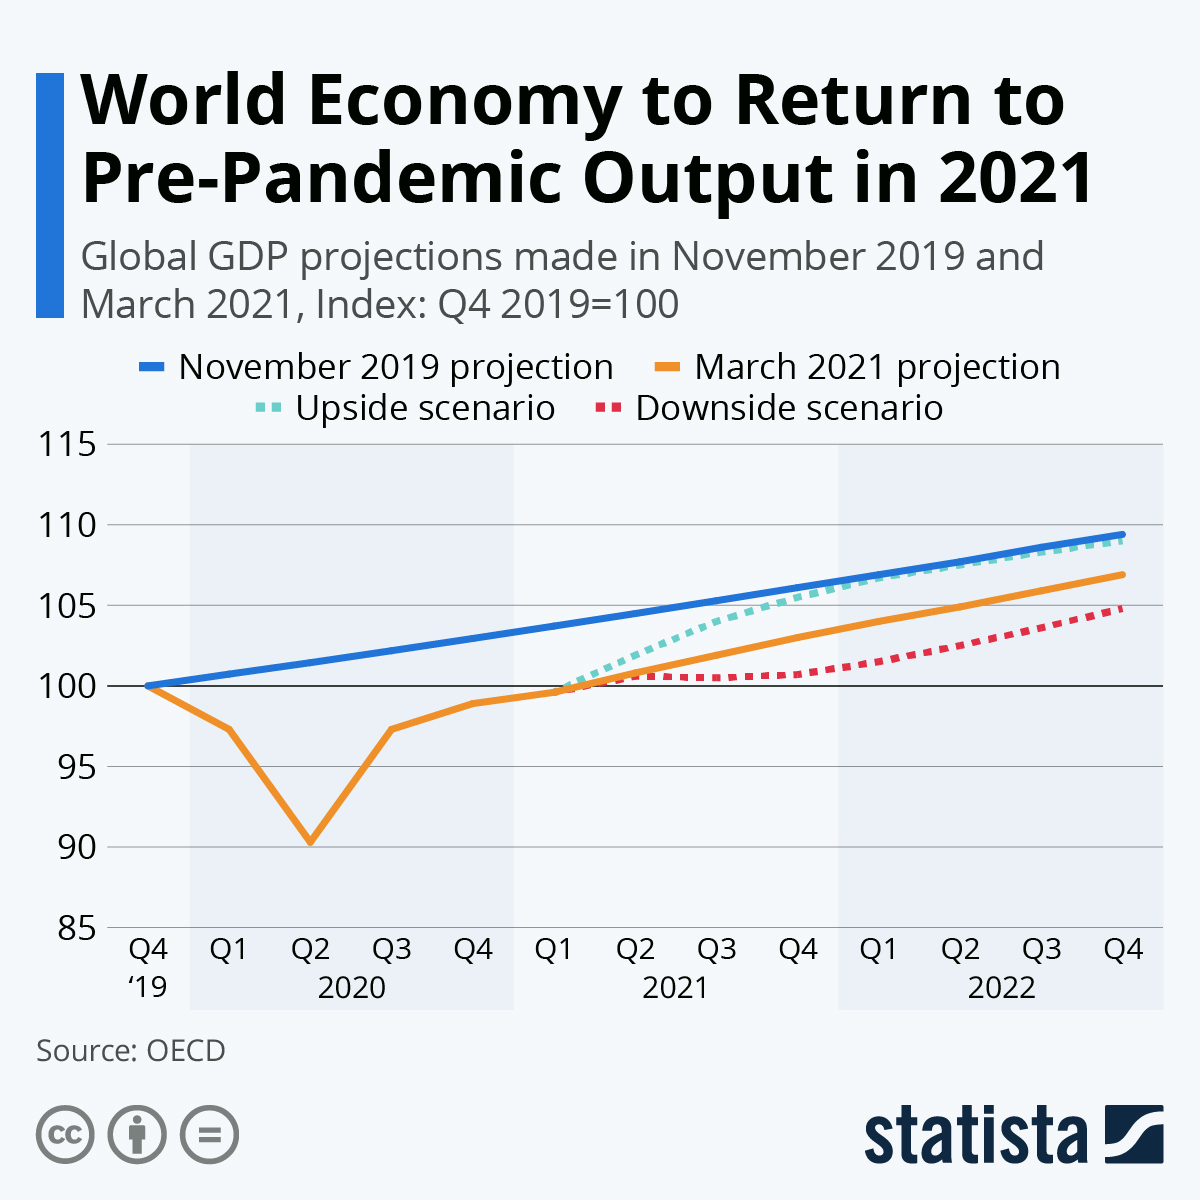 World Economy to Return to Pre-Pandemic Output in 2021